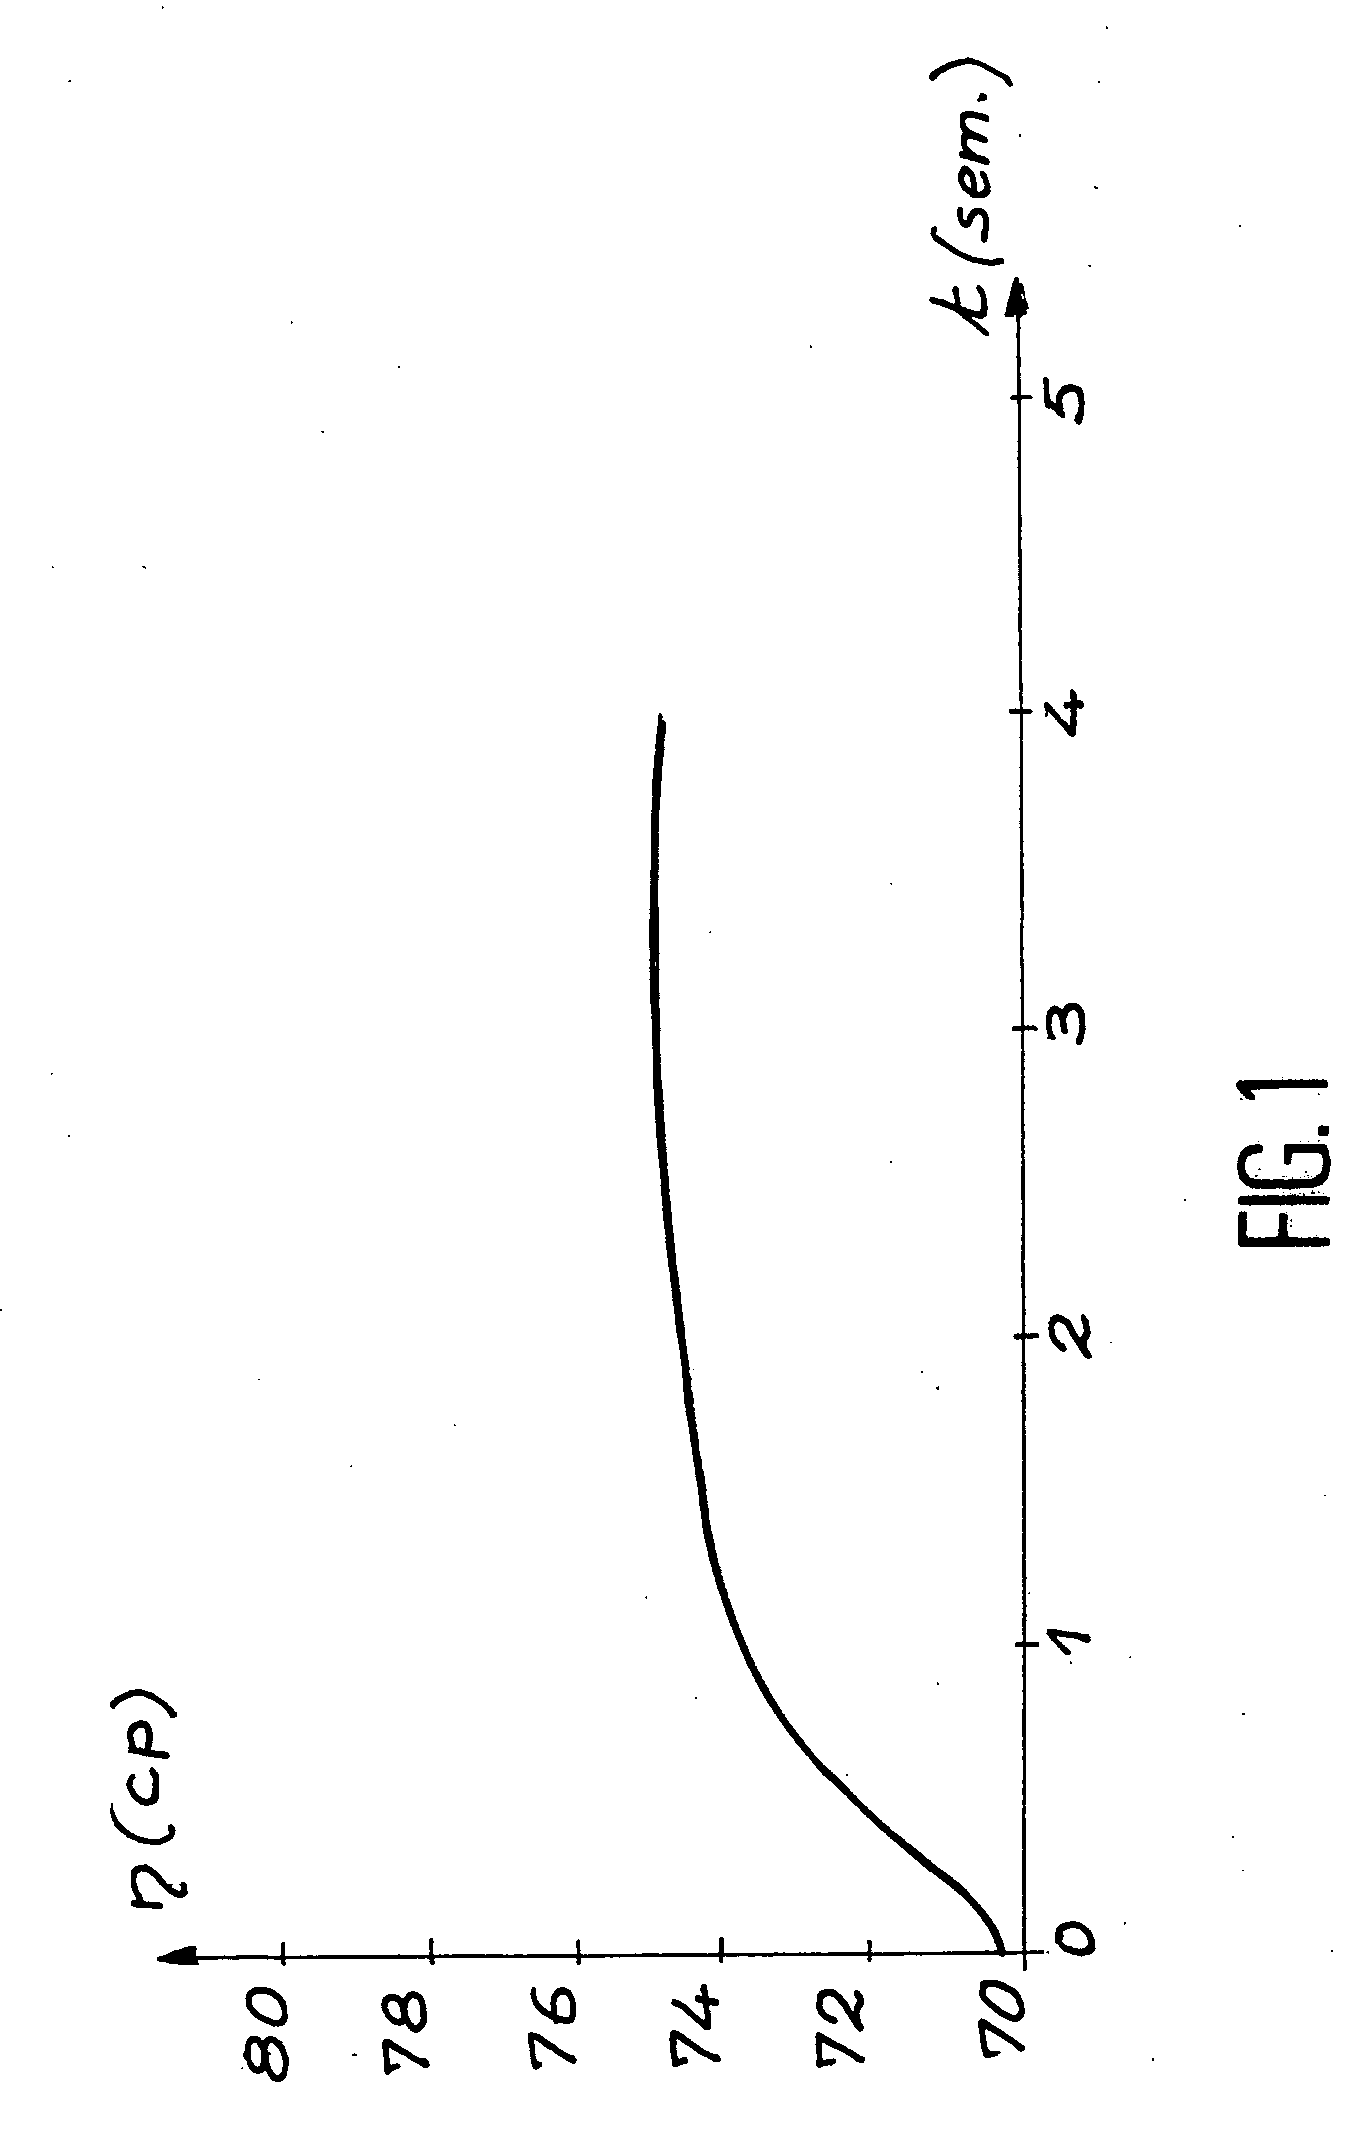 Method of preparing a stable lead zircon-titanate sol and method for preparing films based on same